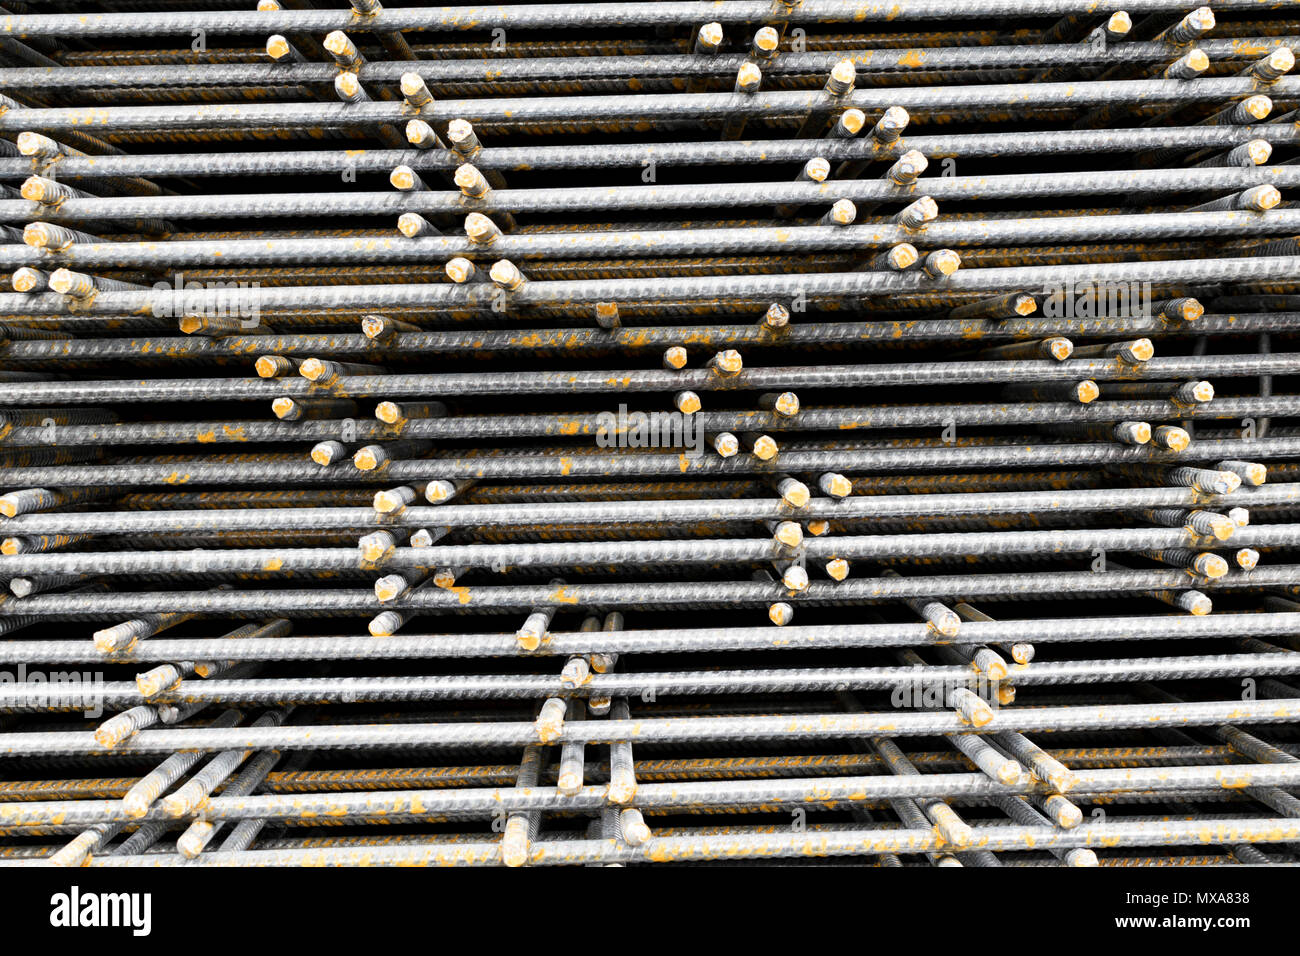 Close-up of a stack of hot-rolled round steel reinforcing bars (Rebars) laid flat Stock Photo